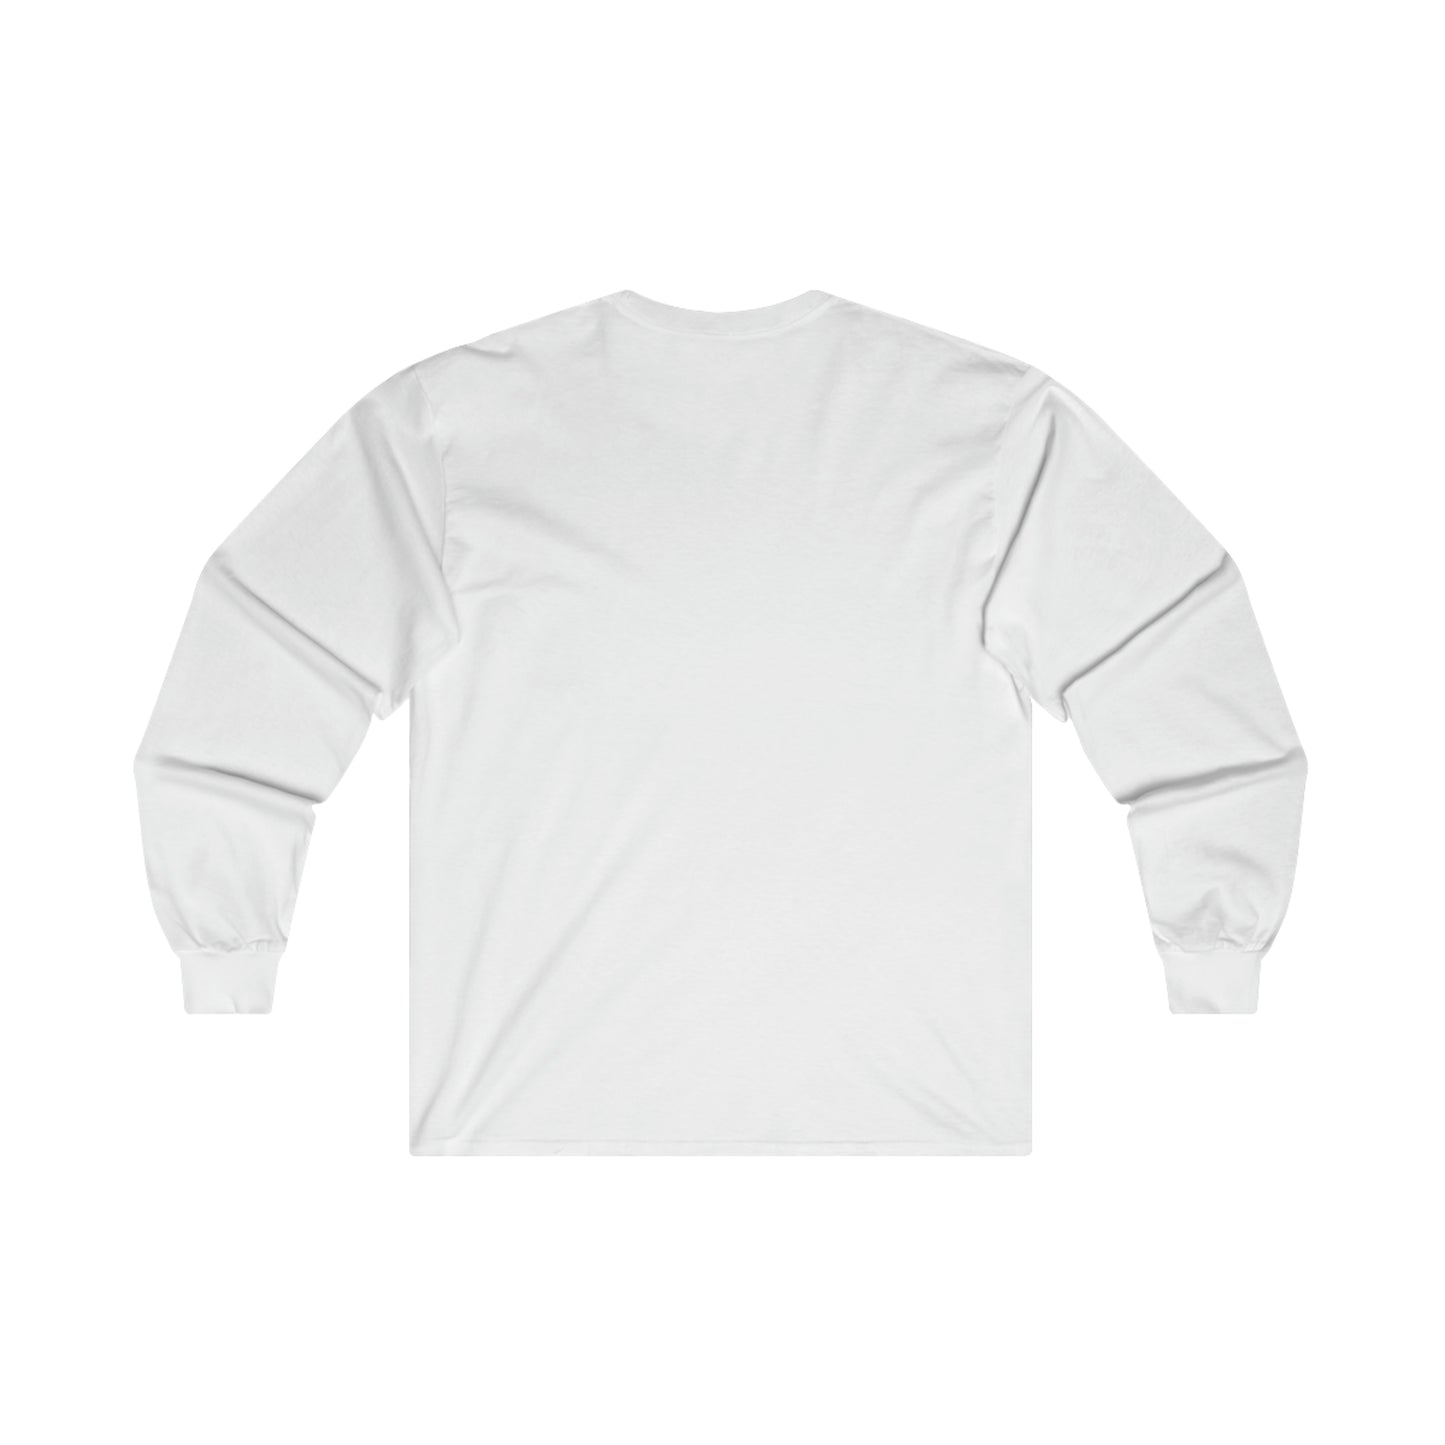 Jordan and Pippen 30 rack and chair - Ultra Cotton Long Sleeve Tee